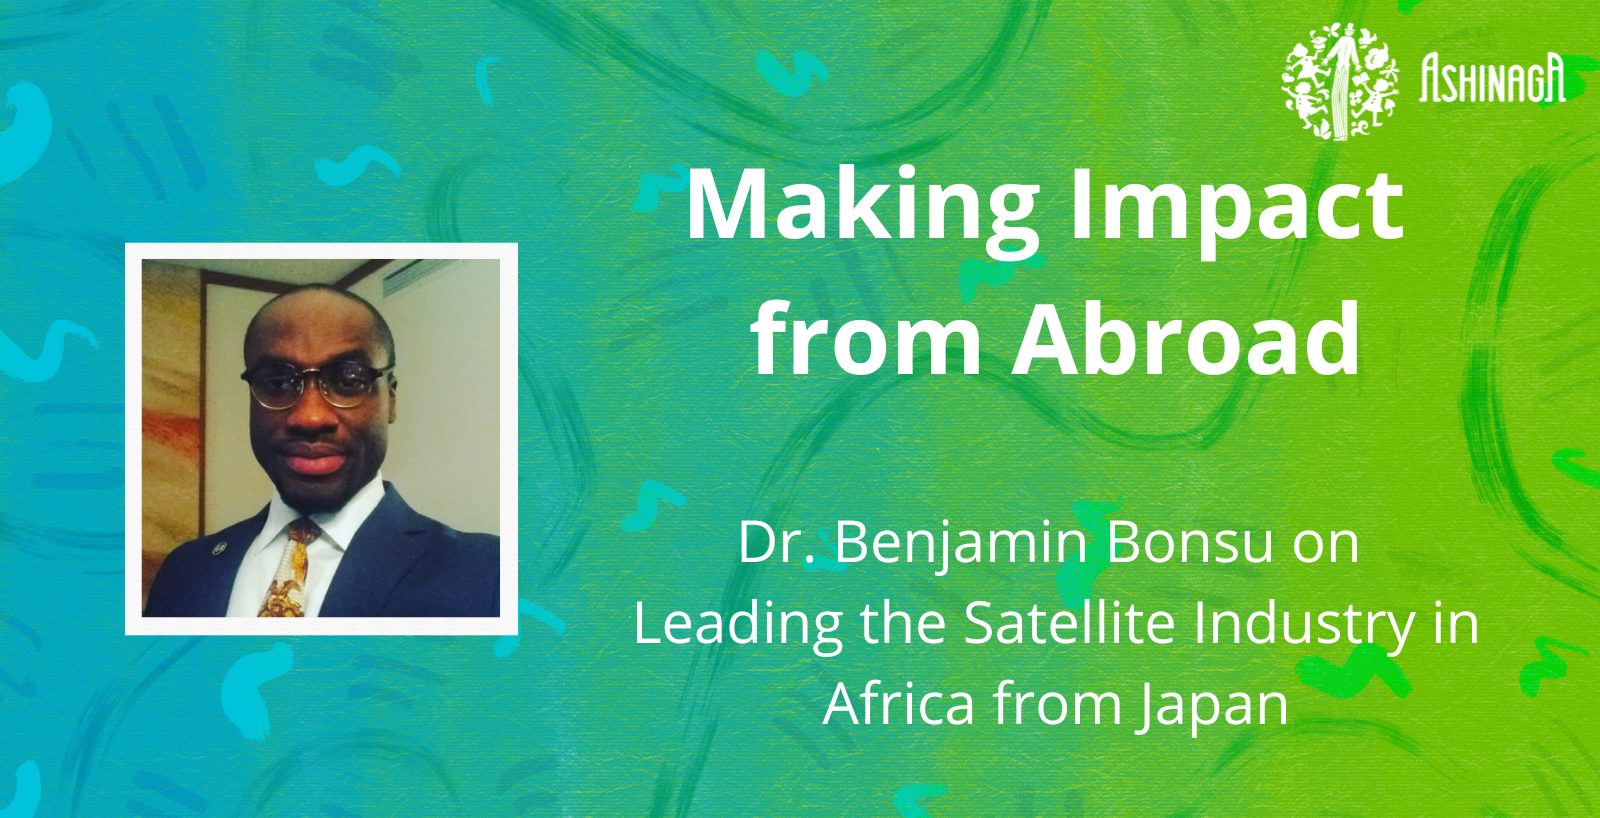 Dr. Benjamin Bonsu on Leading the Satellite Industry in Africa from Japan